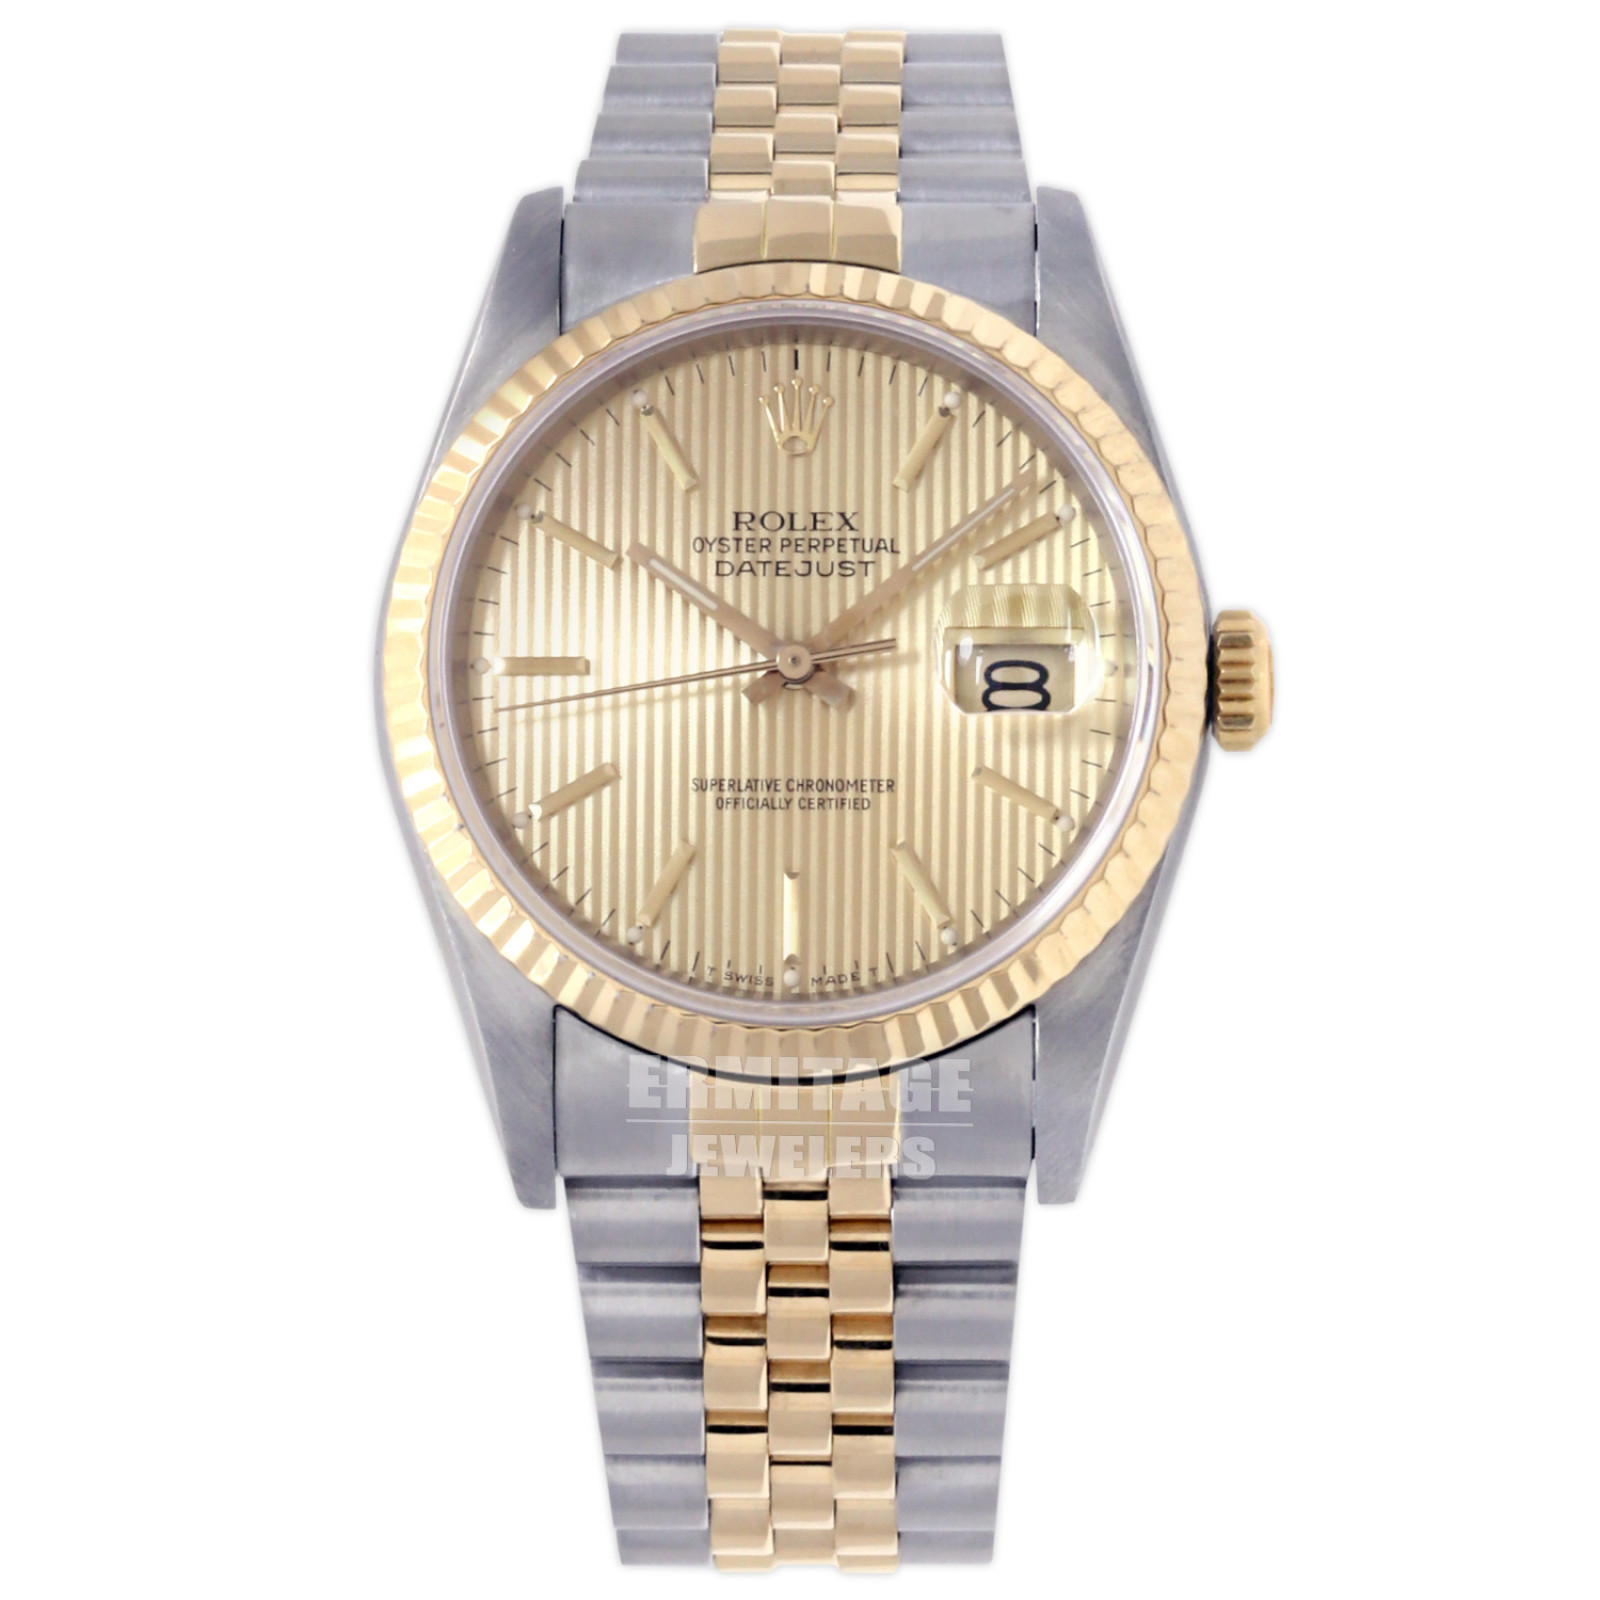 Rolex Datejust 16233 with Champagne Tapestry Dial